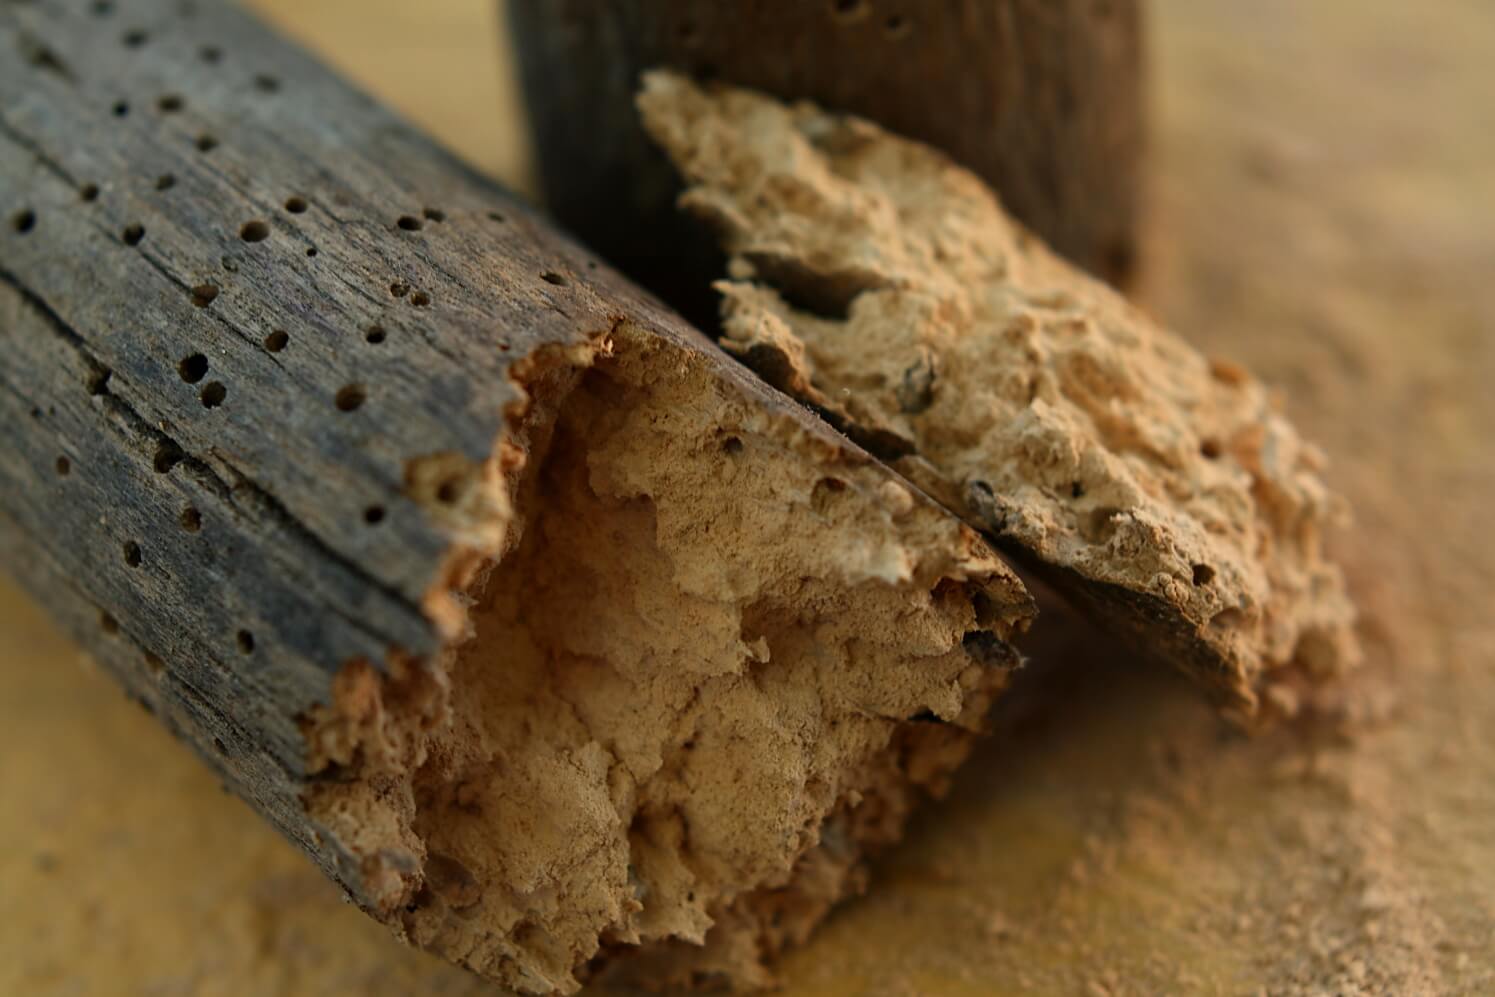 A surface infected with woodworm